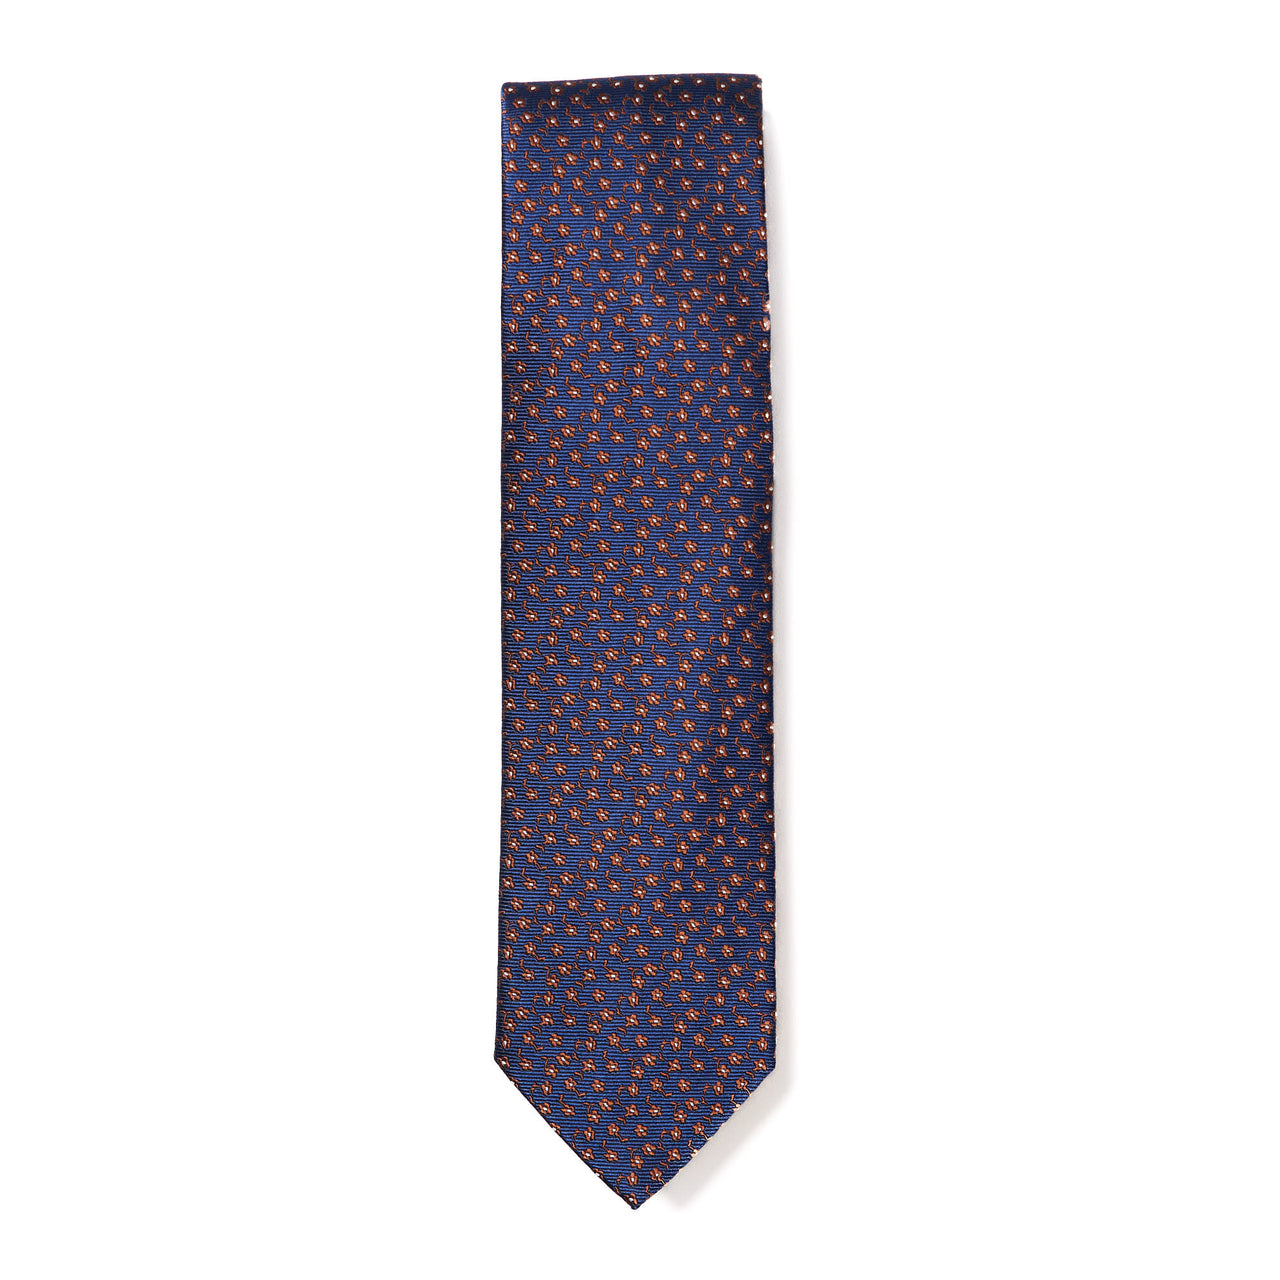 HENRY SARTORIAL X CANTINI Floral Silk Tie NAVY/BROWN